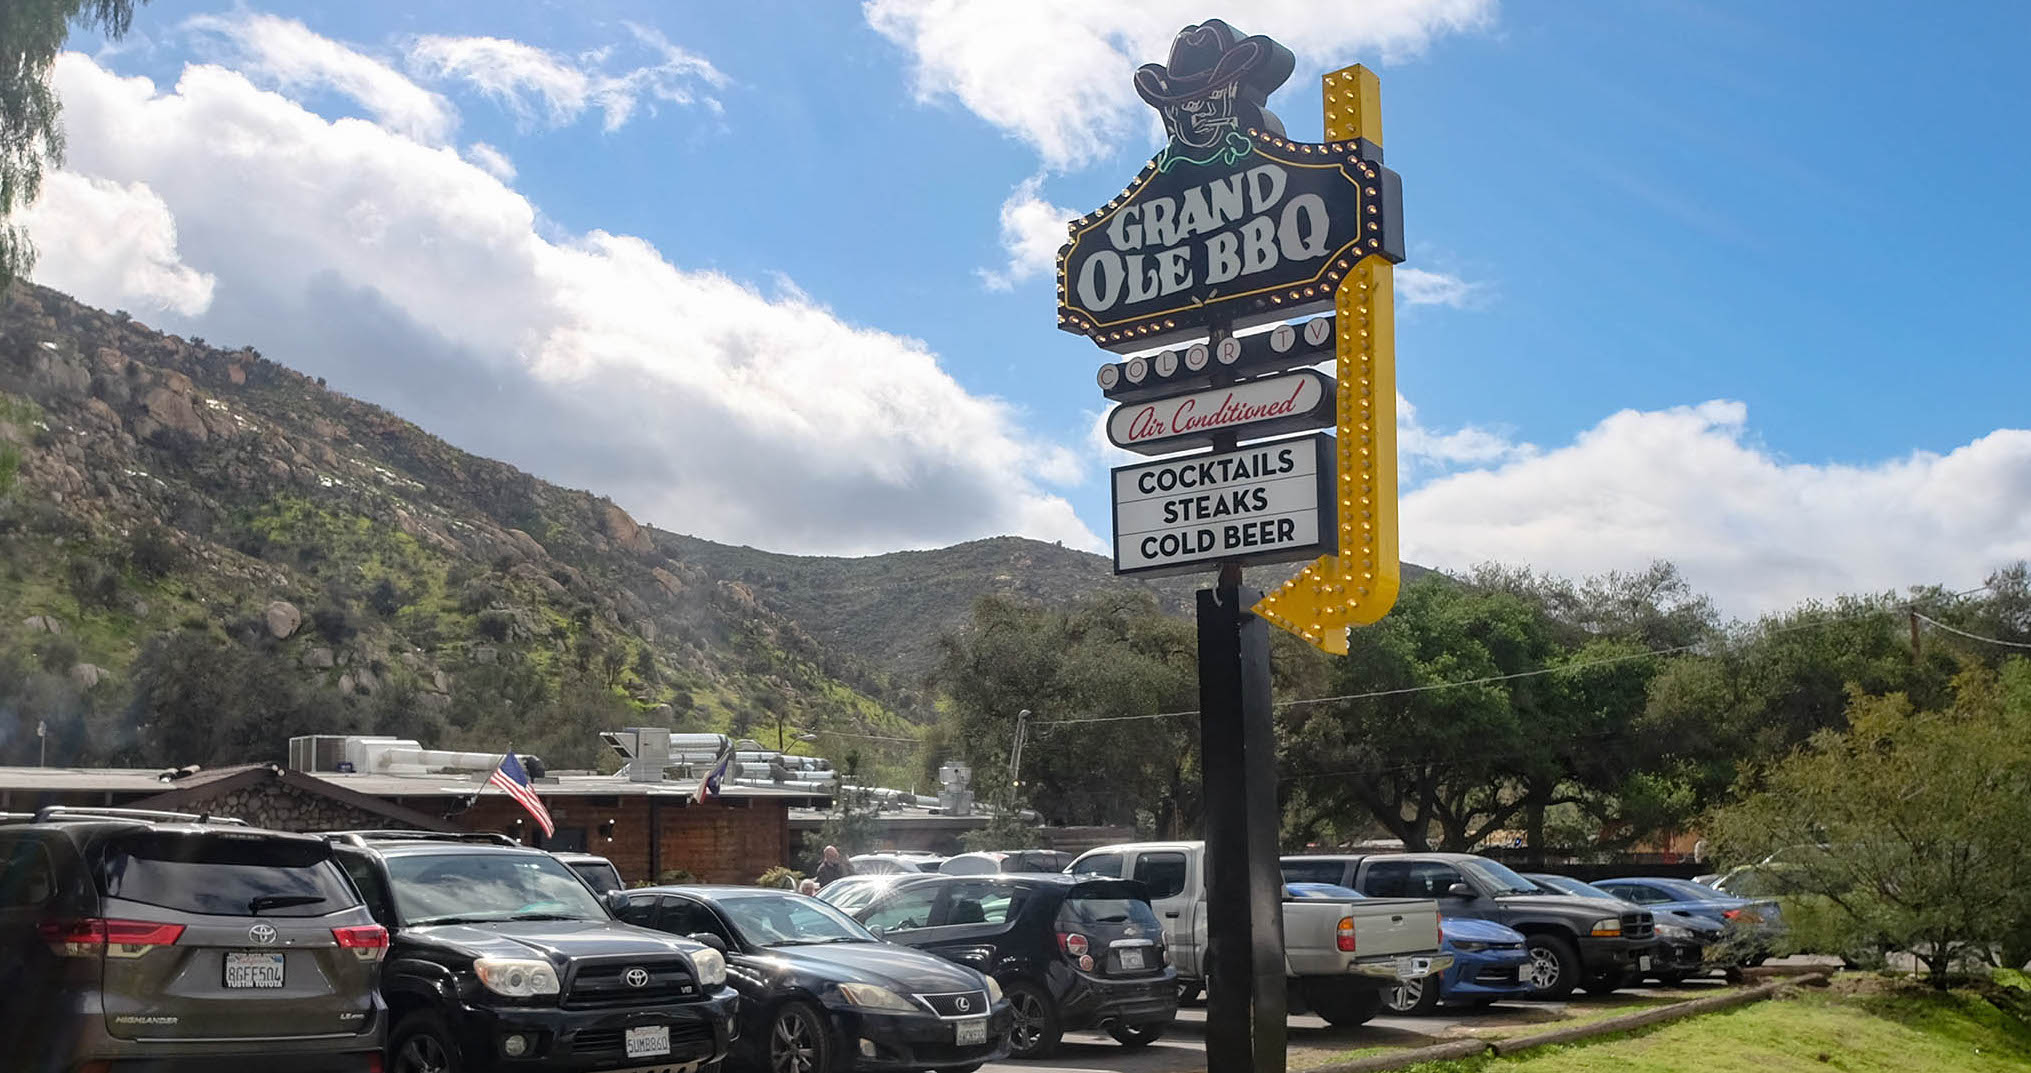 Grand Ole BBQ is the geography | San Diego